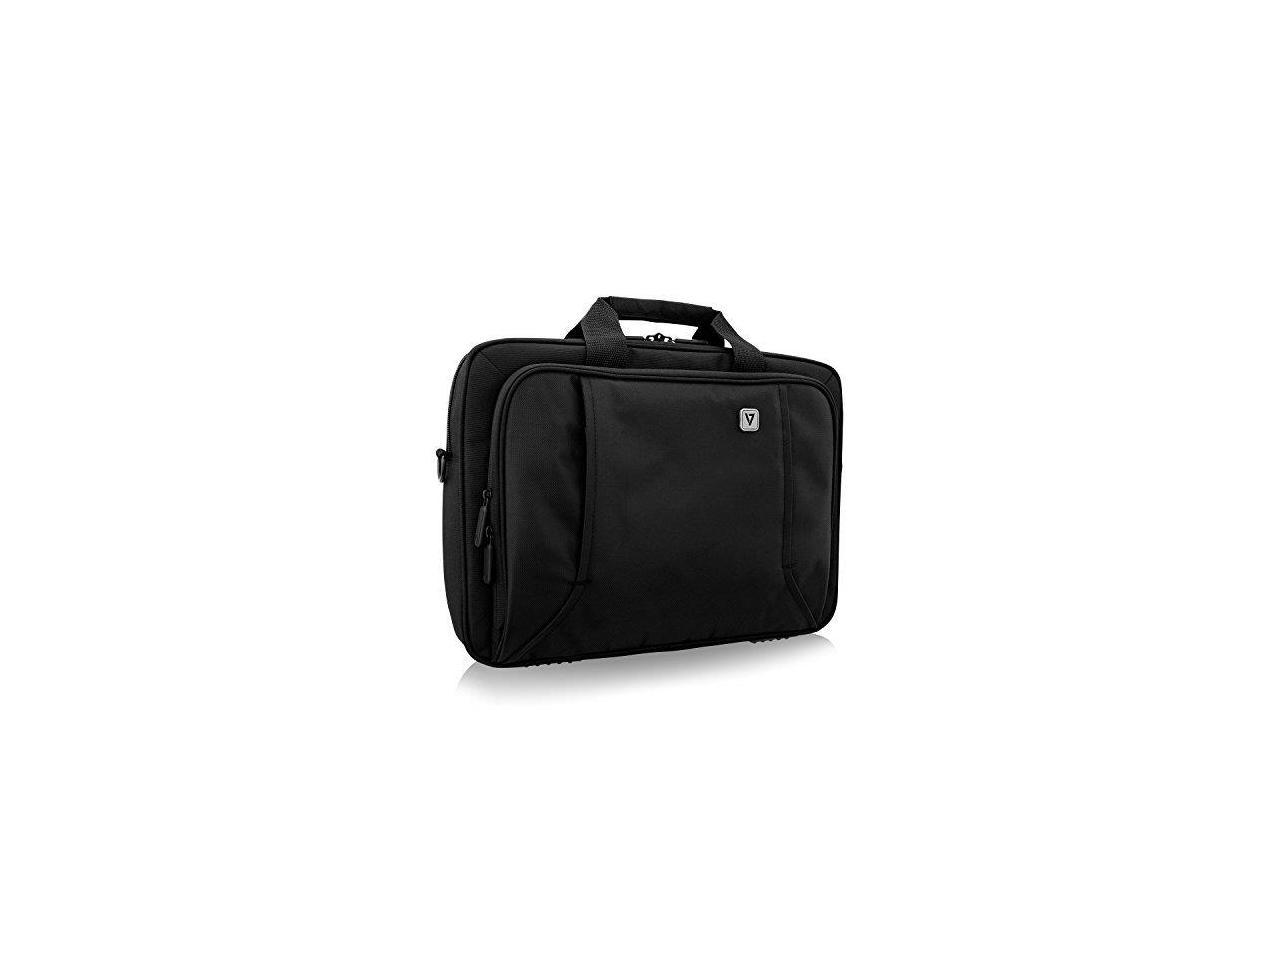 V7 CTP16-BLK-9N PROFESSIONAL TOPLOAD BLK CARRYING CASE FOR 16IN NOTEBOOK